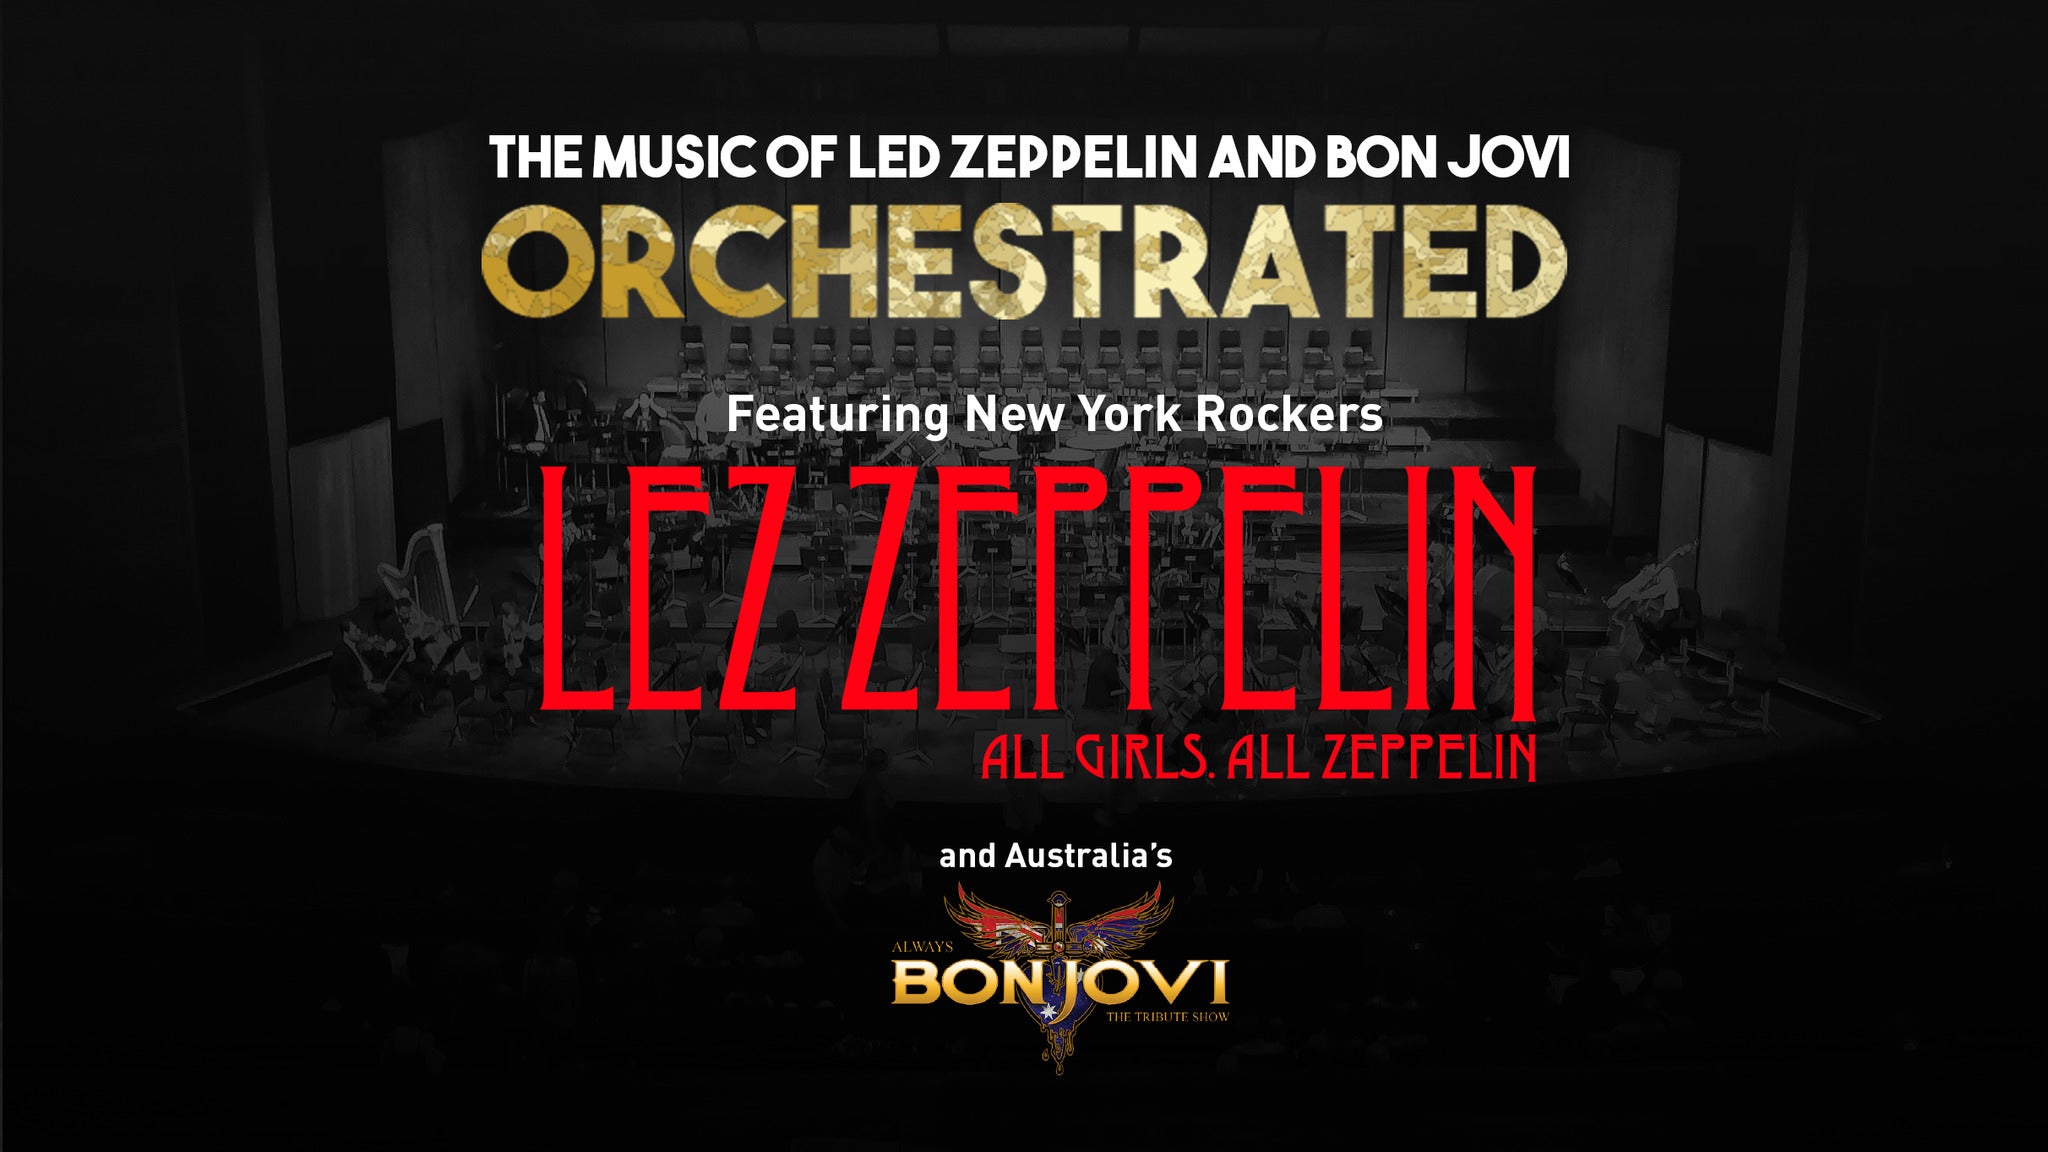 Image used with permission from Ticketmaster | Lez Zeppelin and Always Bon Jovi tickets